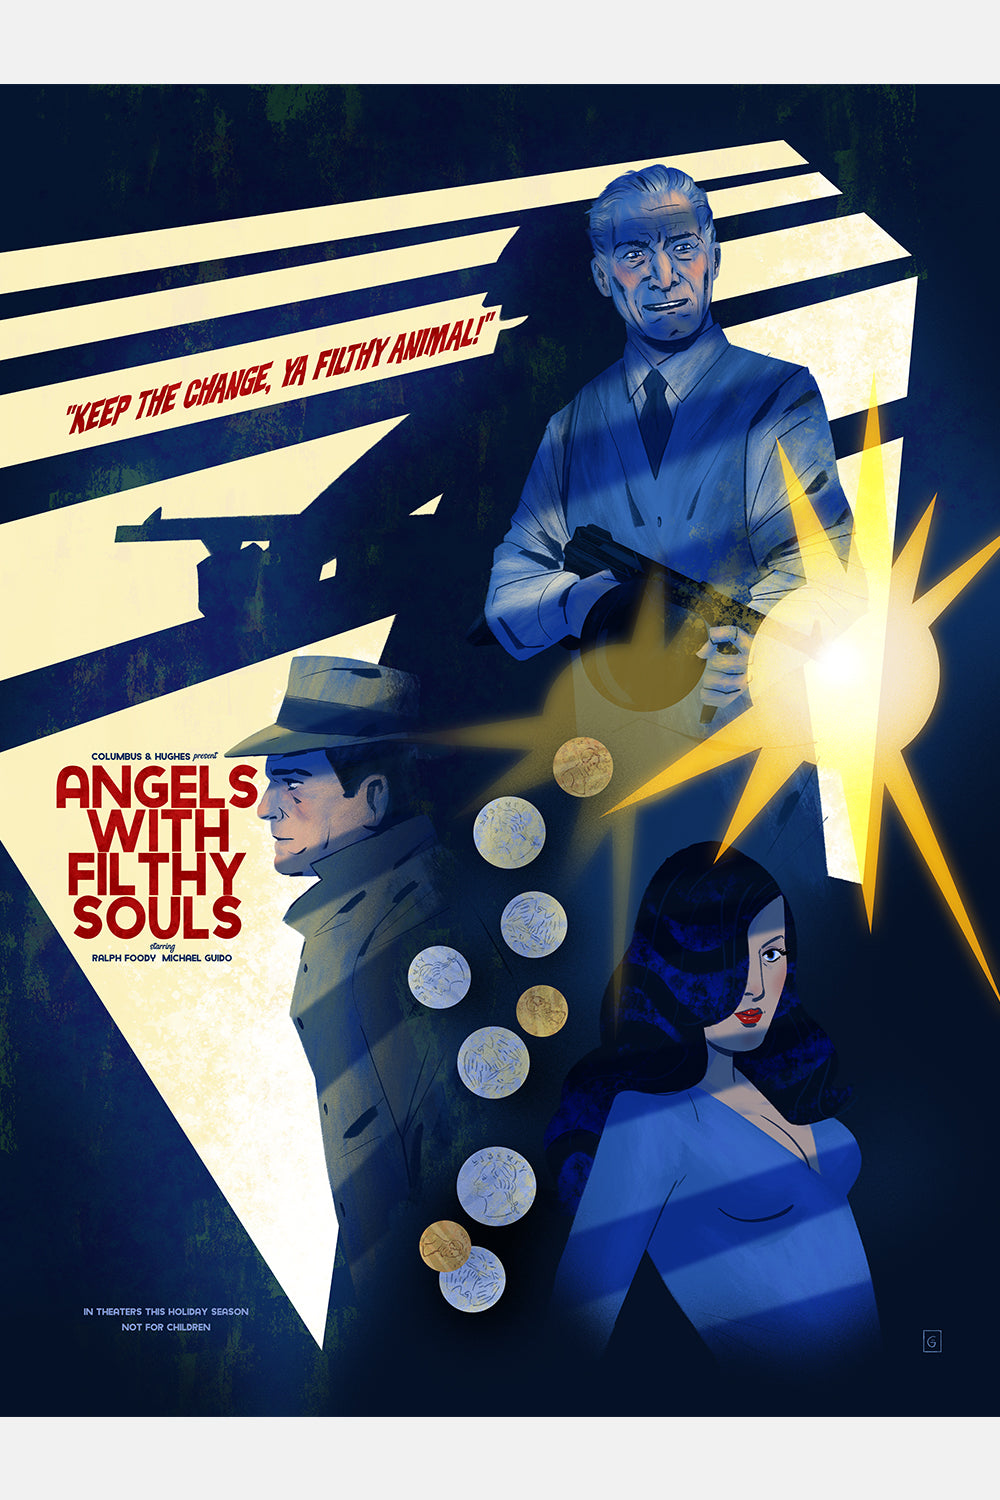 Angels With Filthy Souls by Graham Corcoran - Hero Complex Gallery